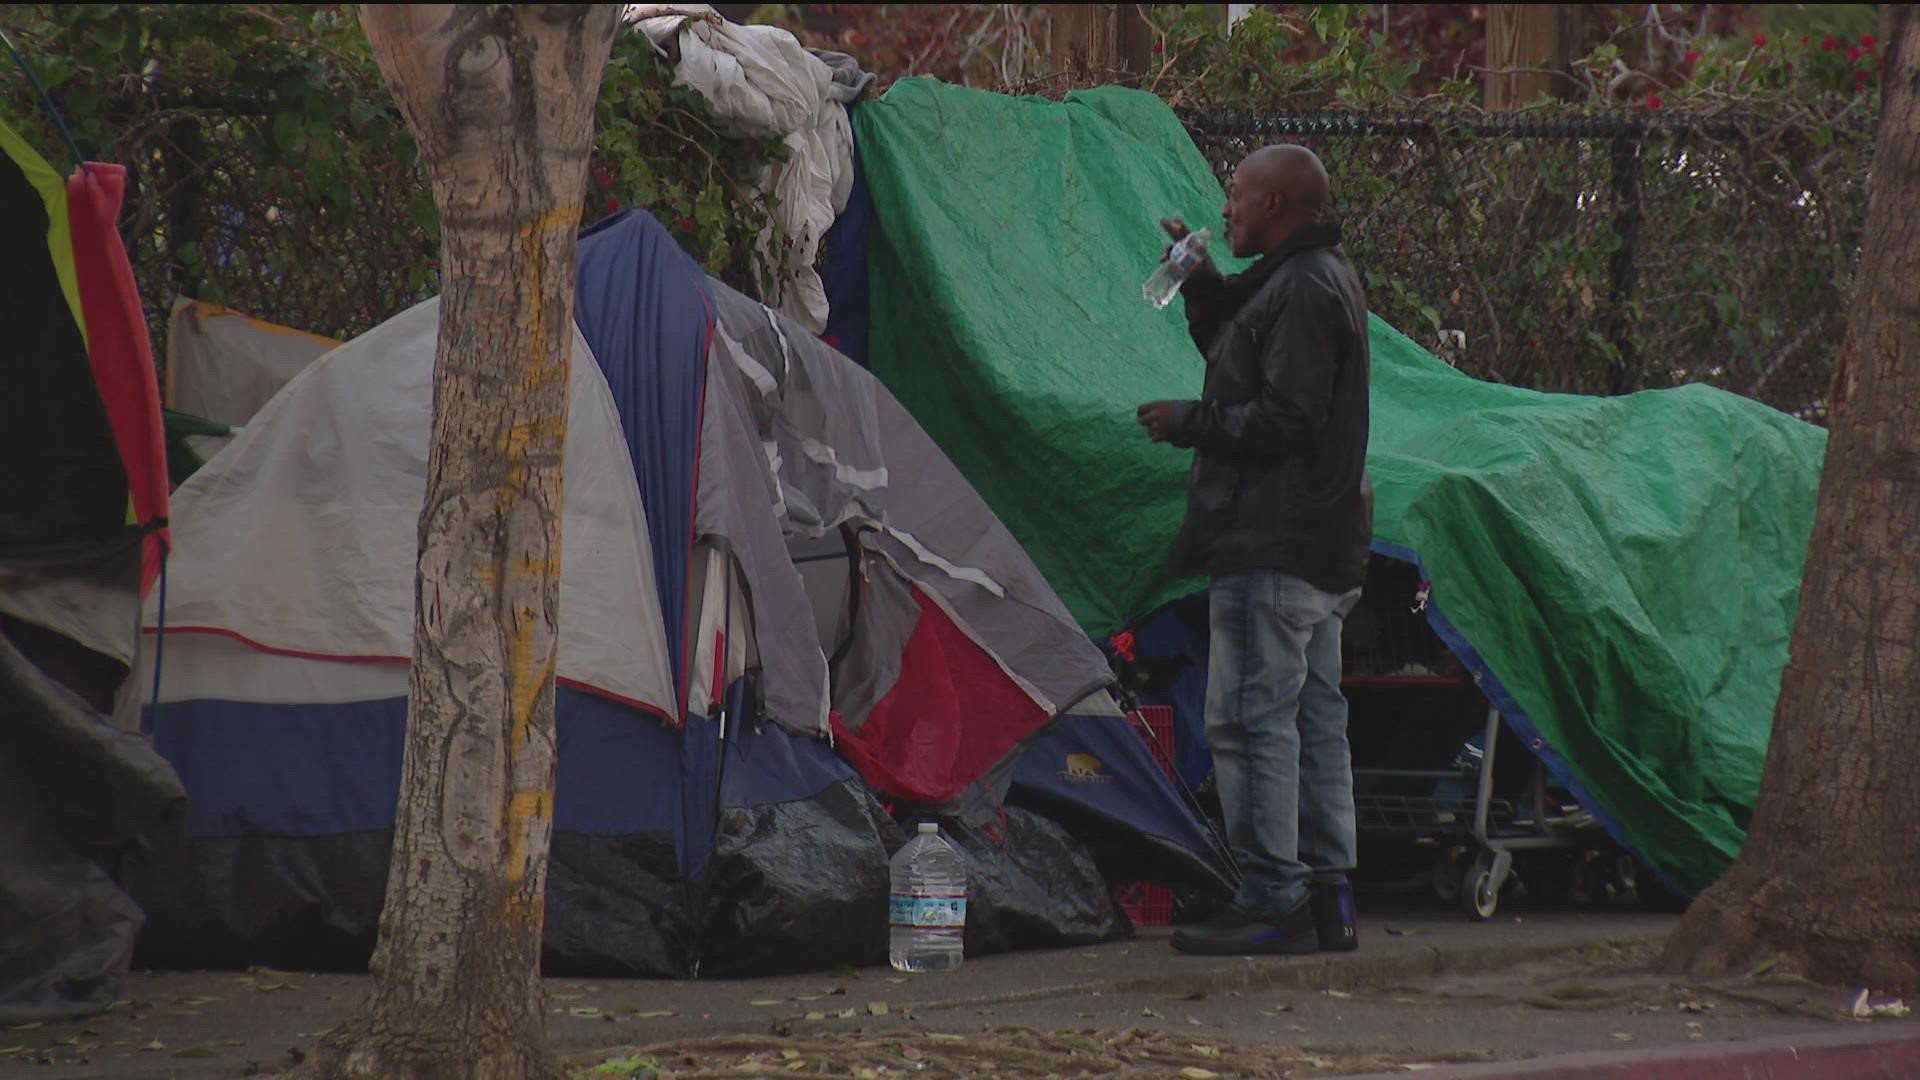 San Diego City reinstated a policy that makes setting up homeless encampments unallowable, but some say the mayor's policy was short-lived.